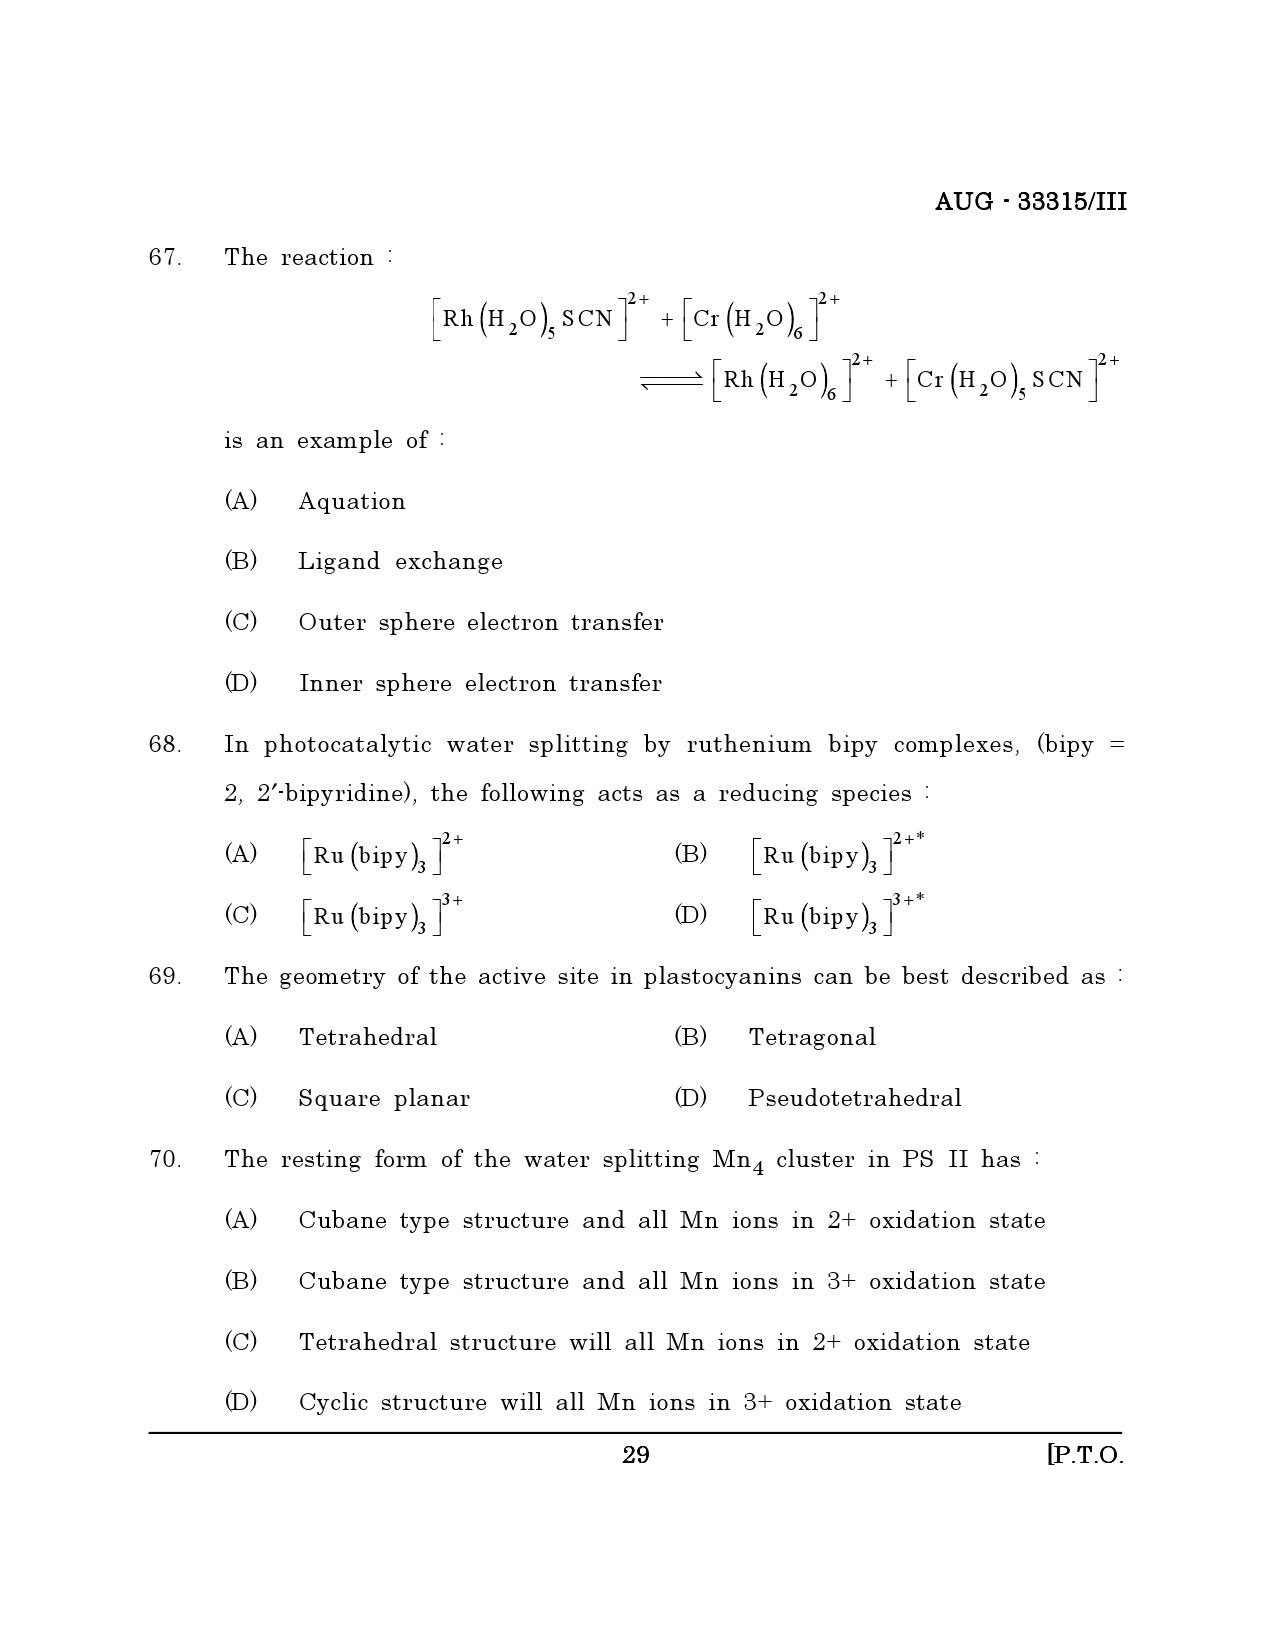 Maharashtra SET Chemical Sciences Question Paper III August 2015 28